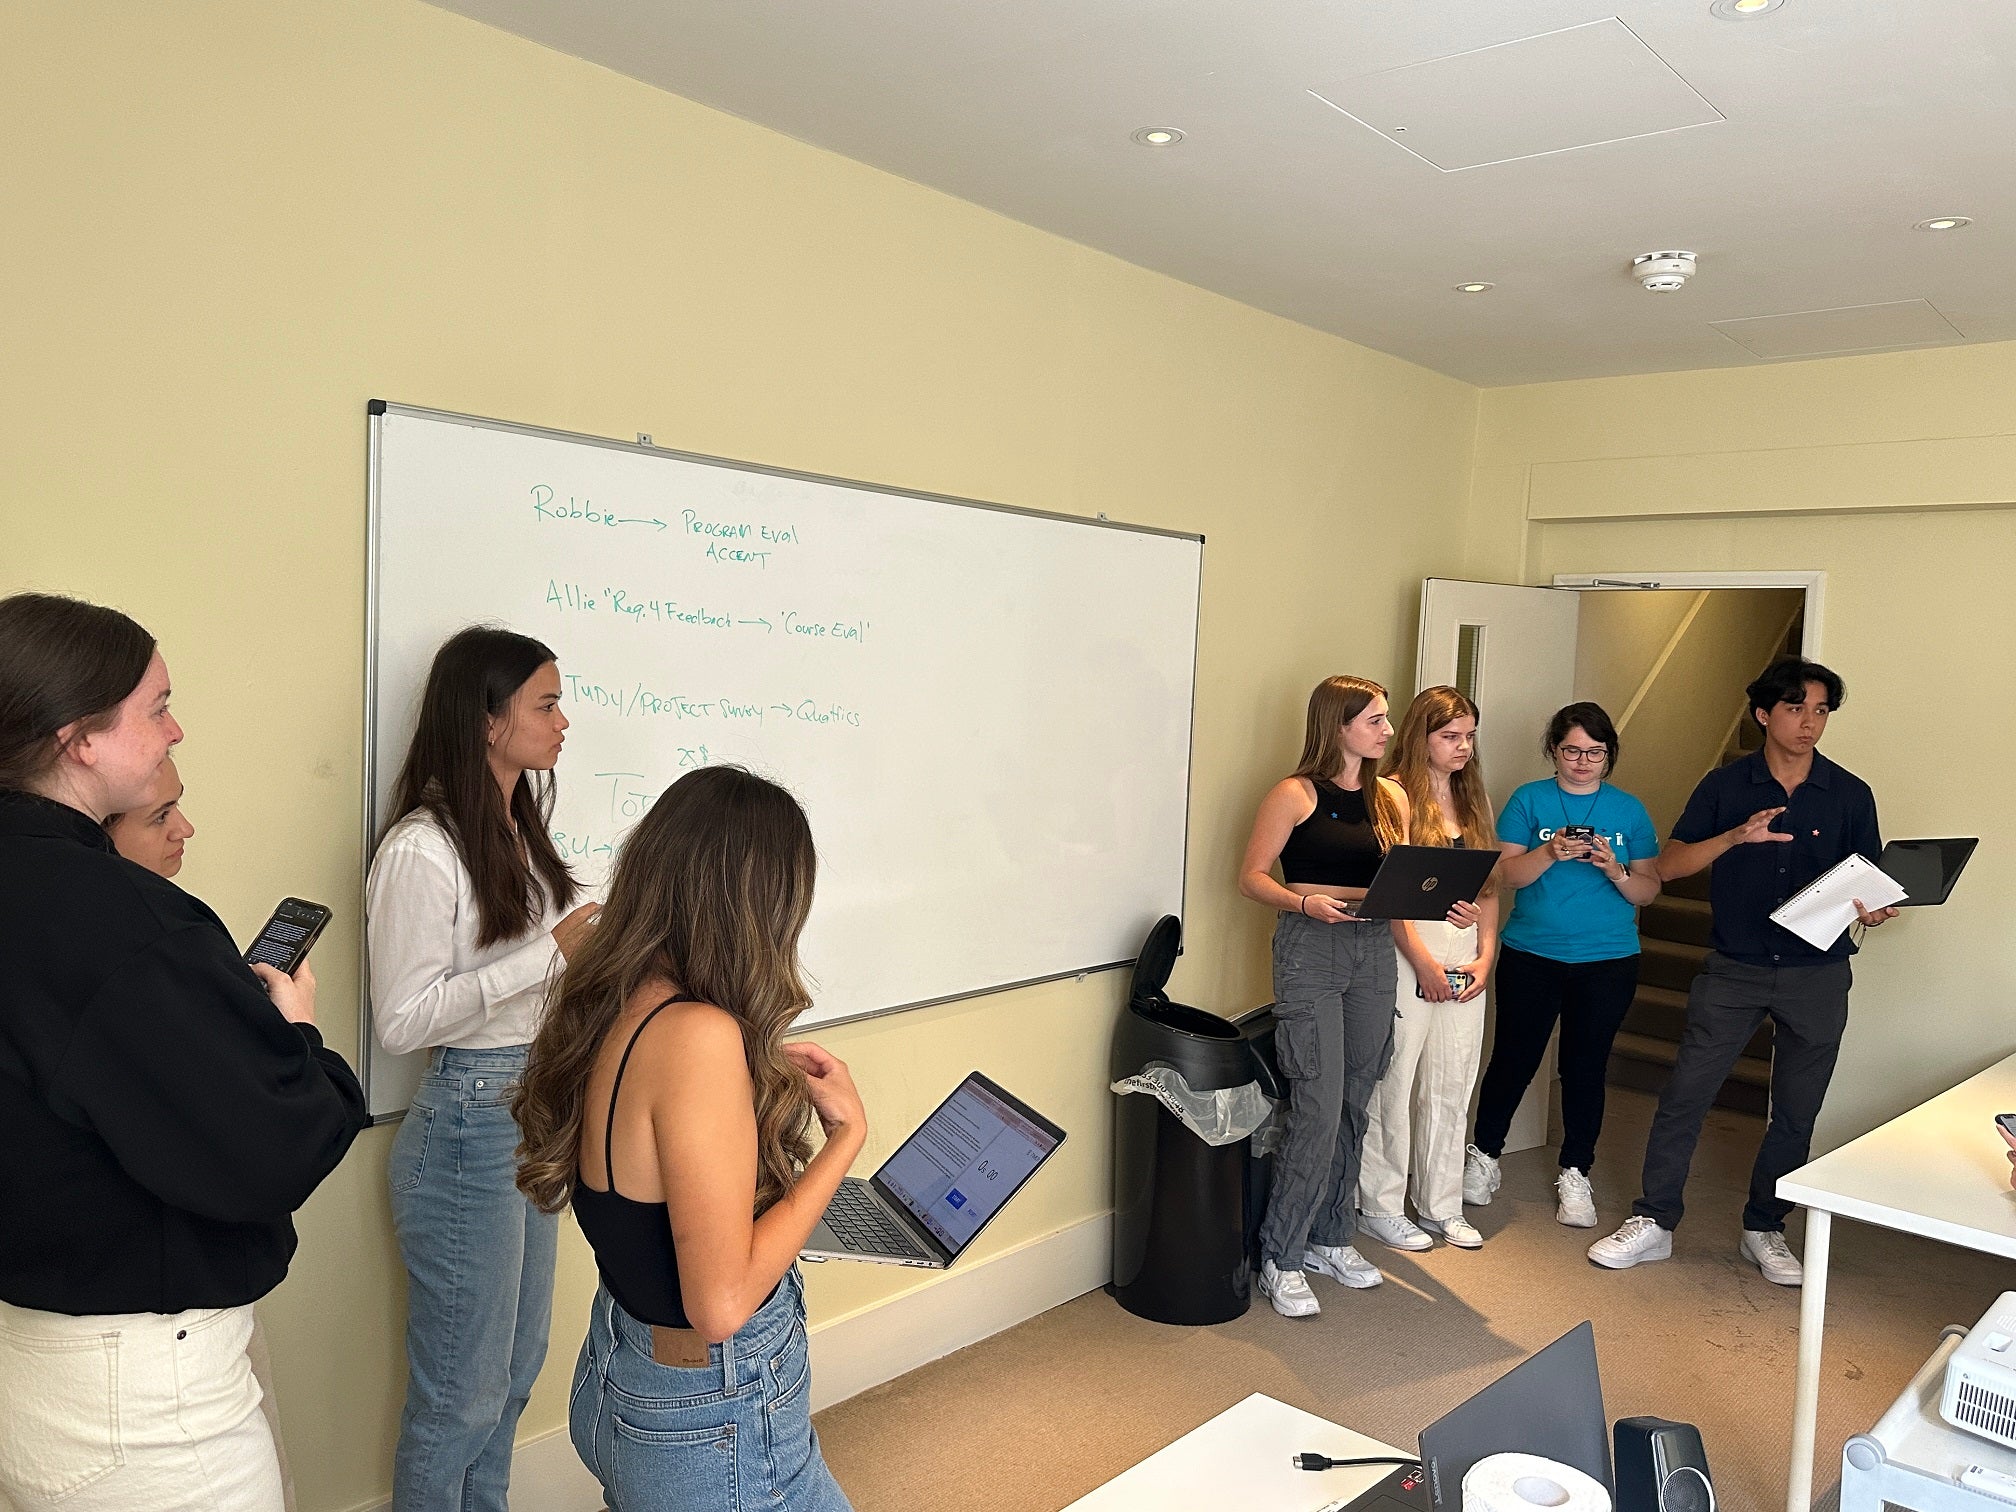 Students stand at the front of a classroom, some with laptops in their hands while carrying out an in-class debate assignment.